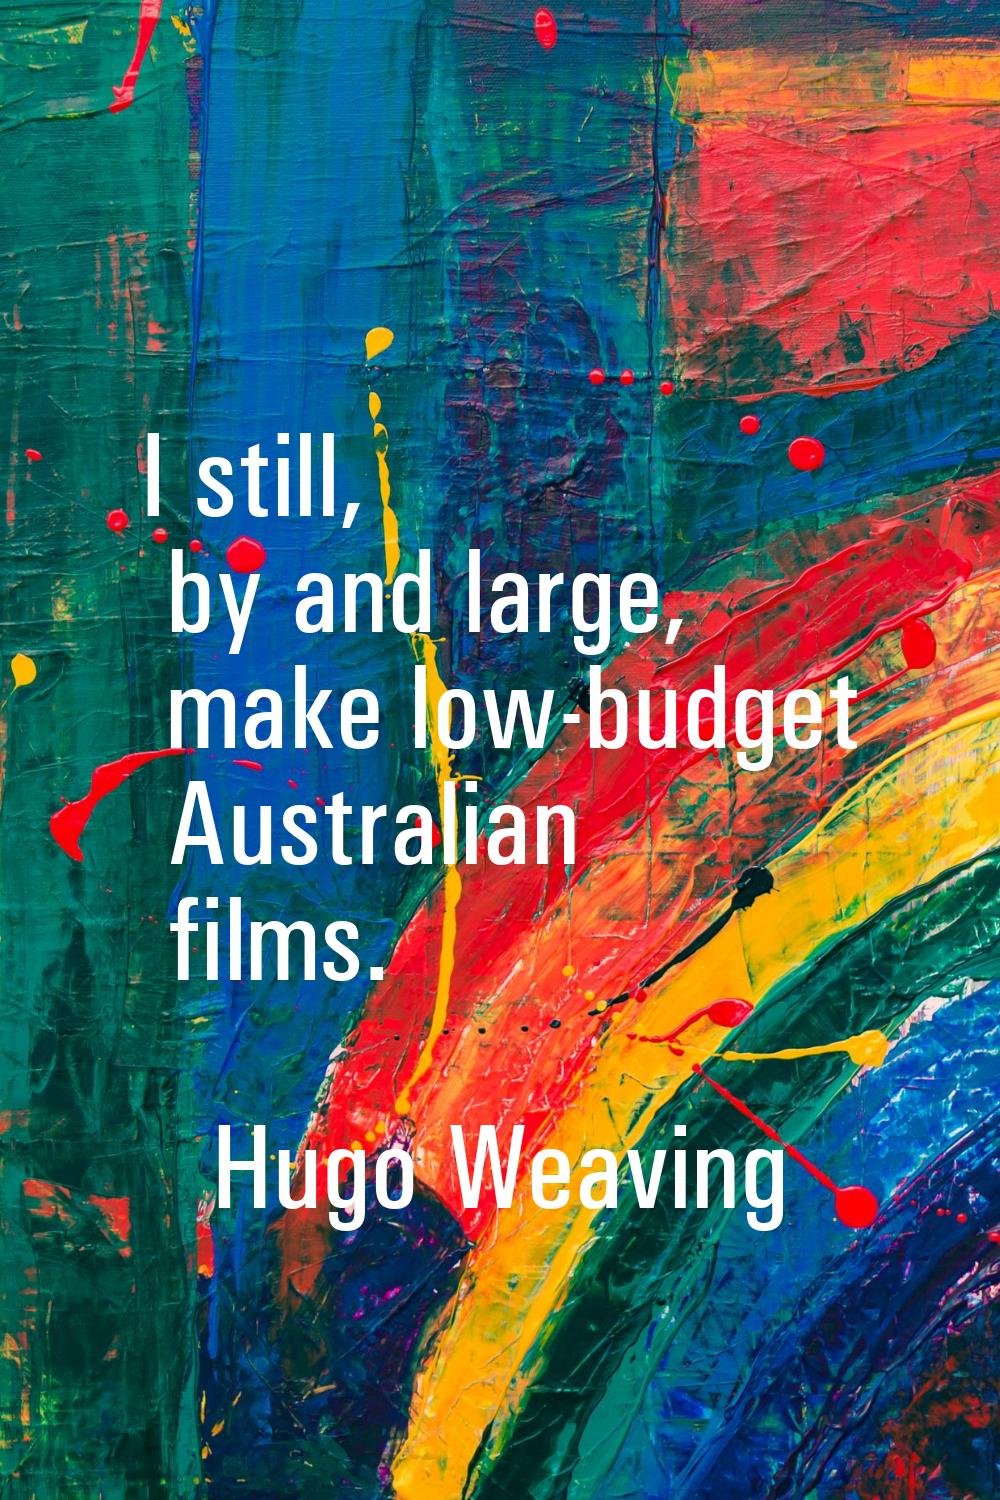 I still, by and large, make low-budget Australian films.